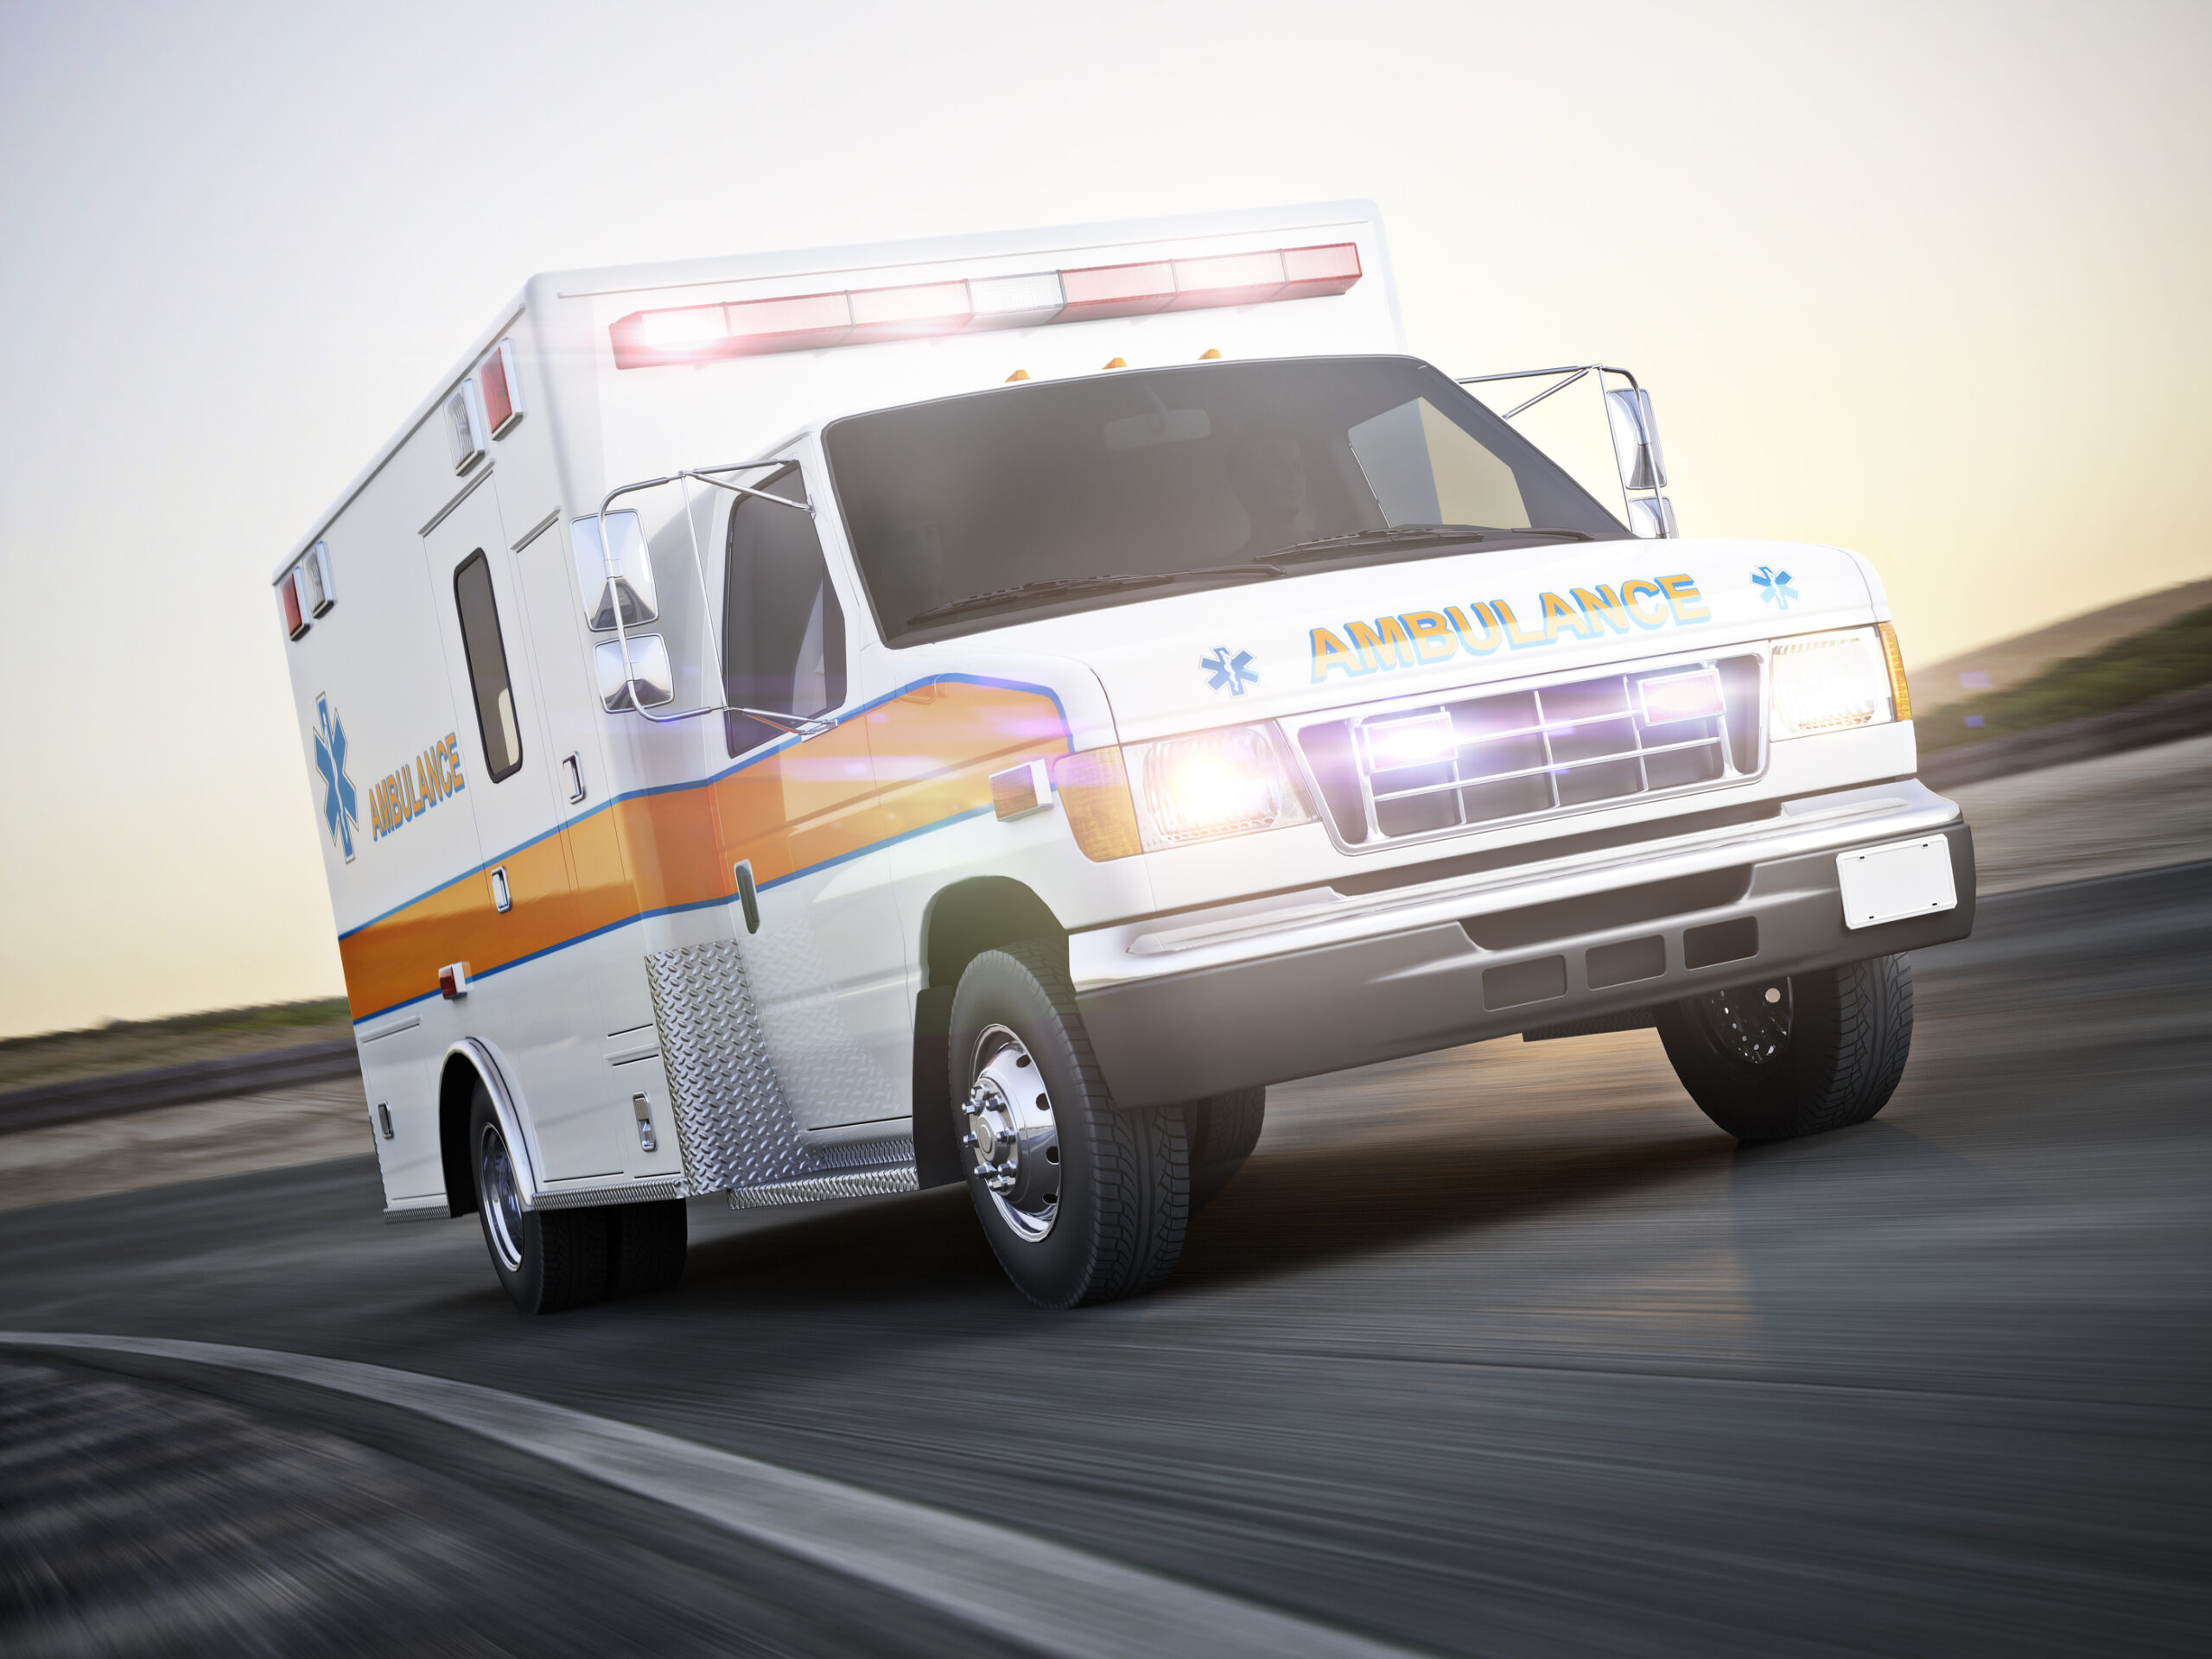 Ambulance running with lights and sirens on a street with motion